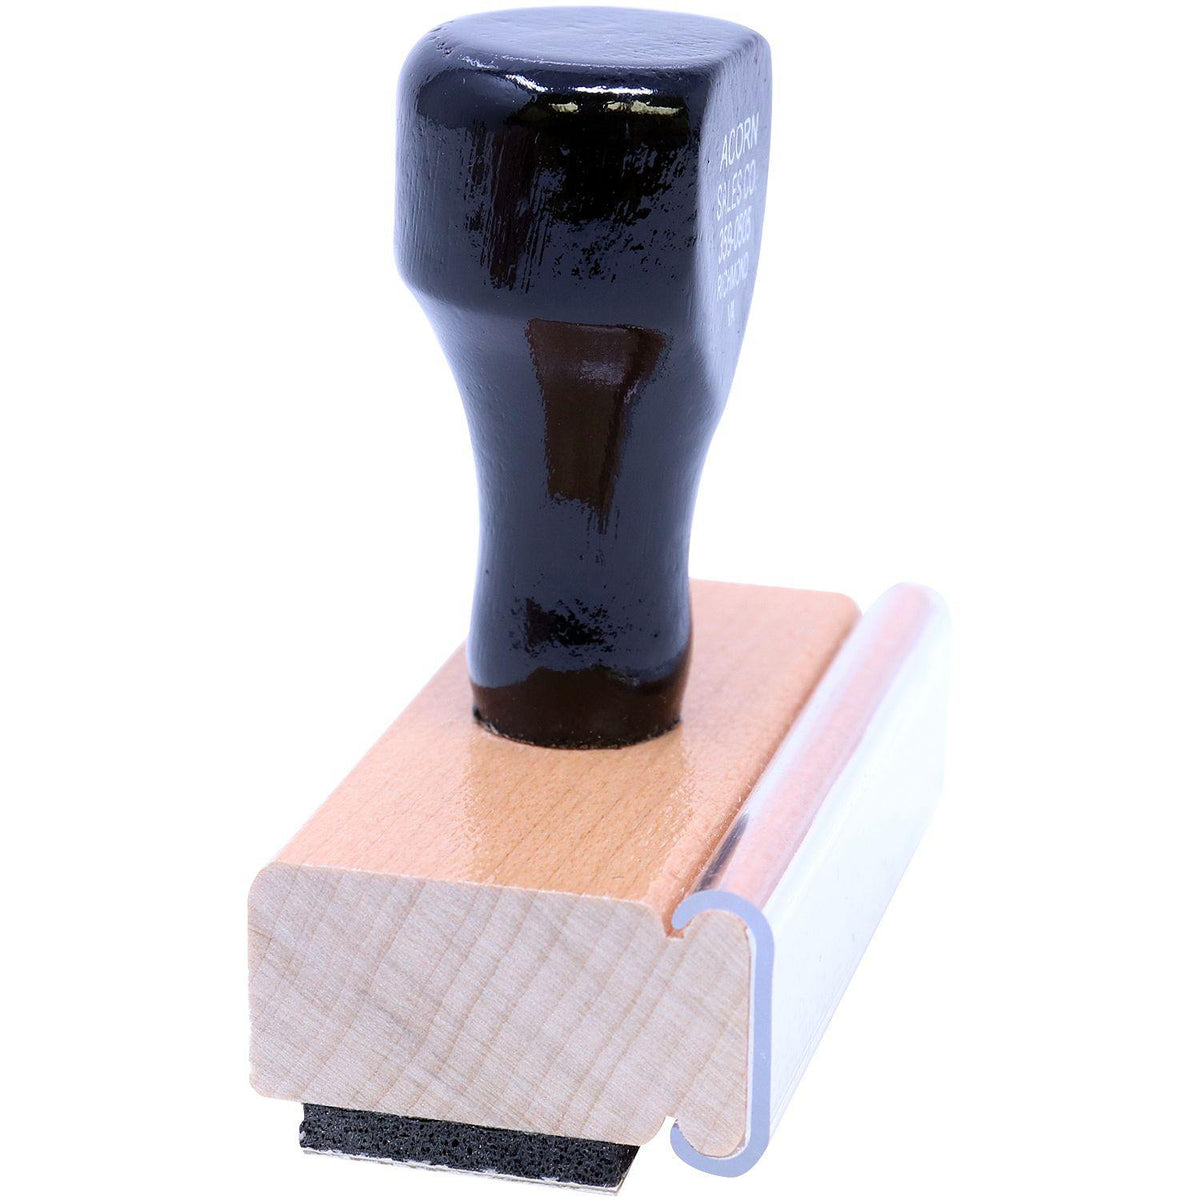 Side View of Large Secure Rubber Stamp at an Angle